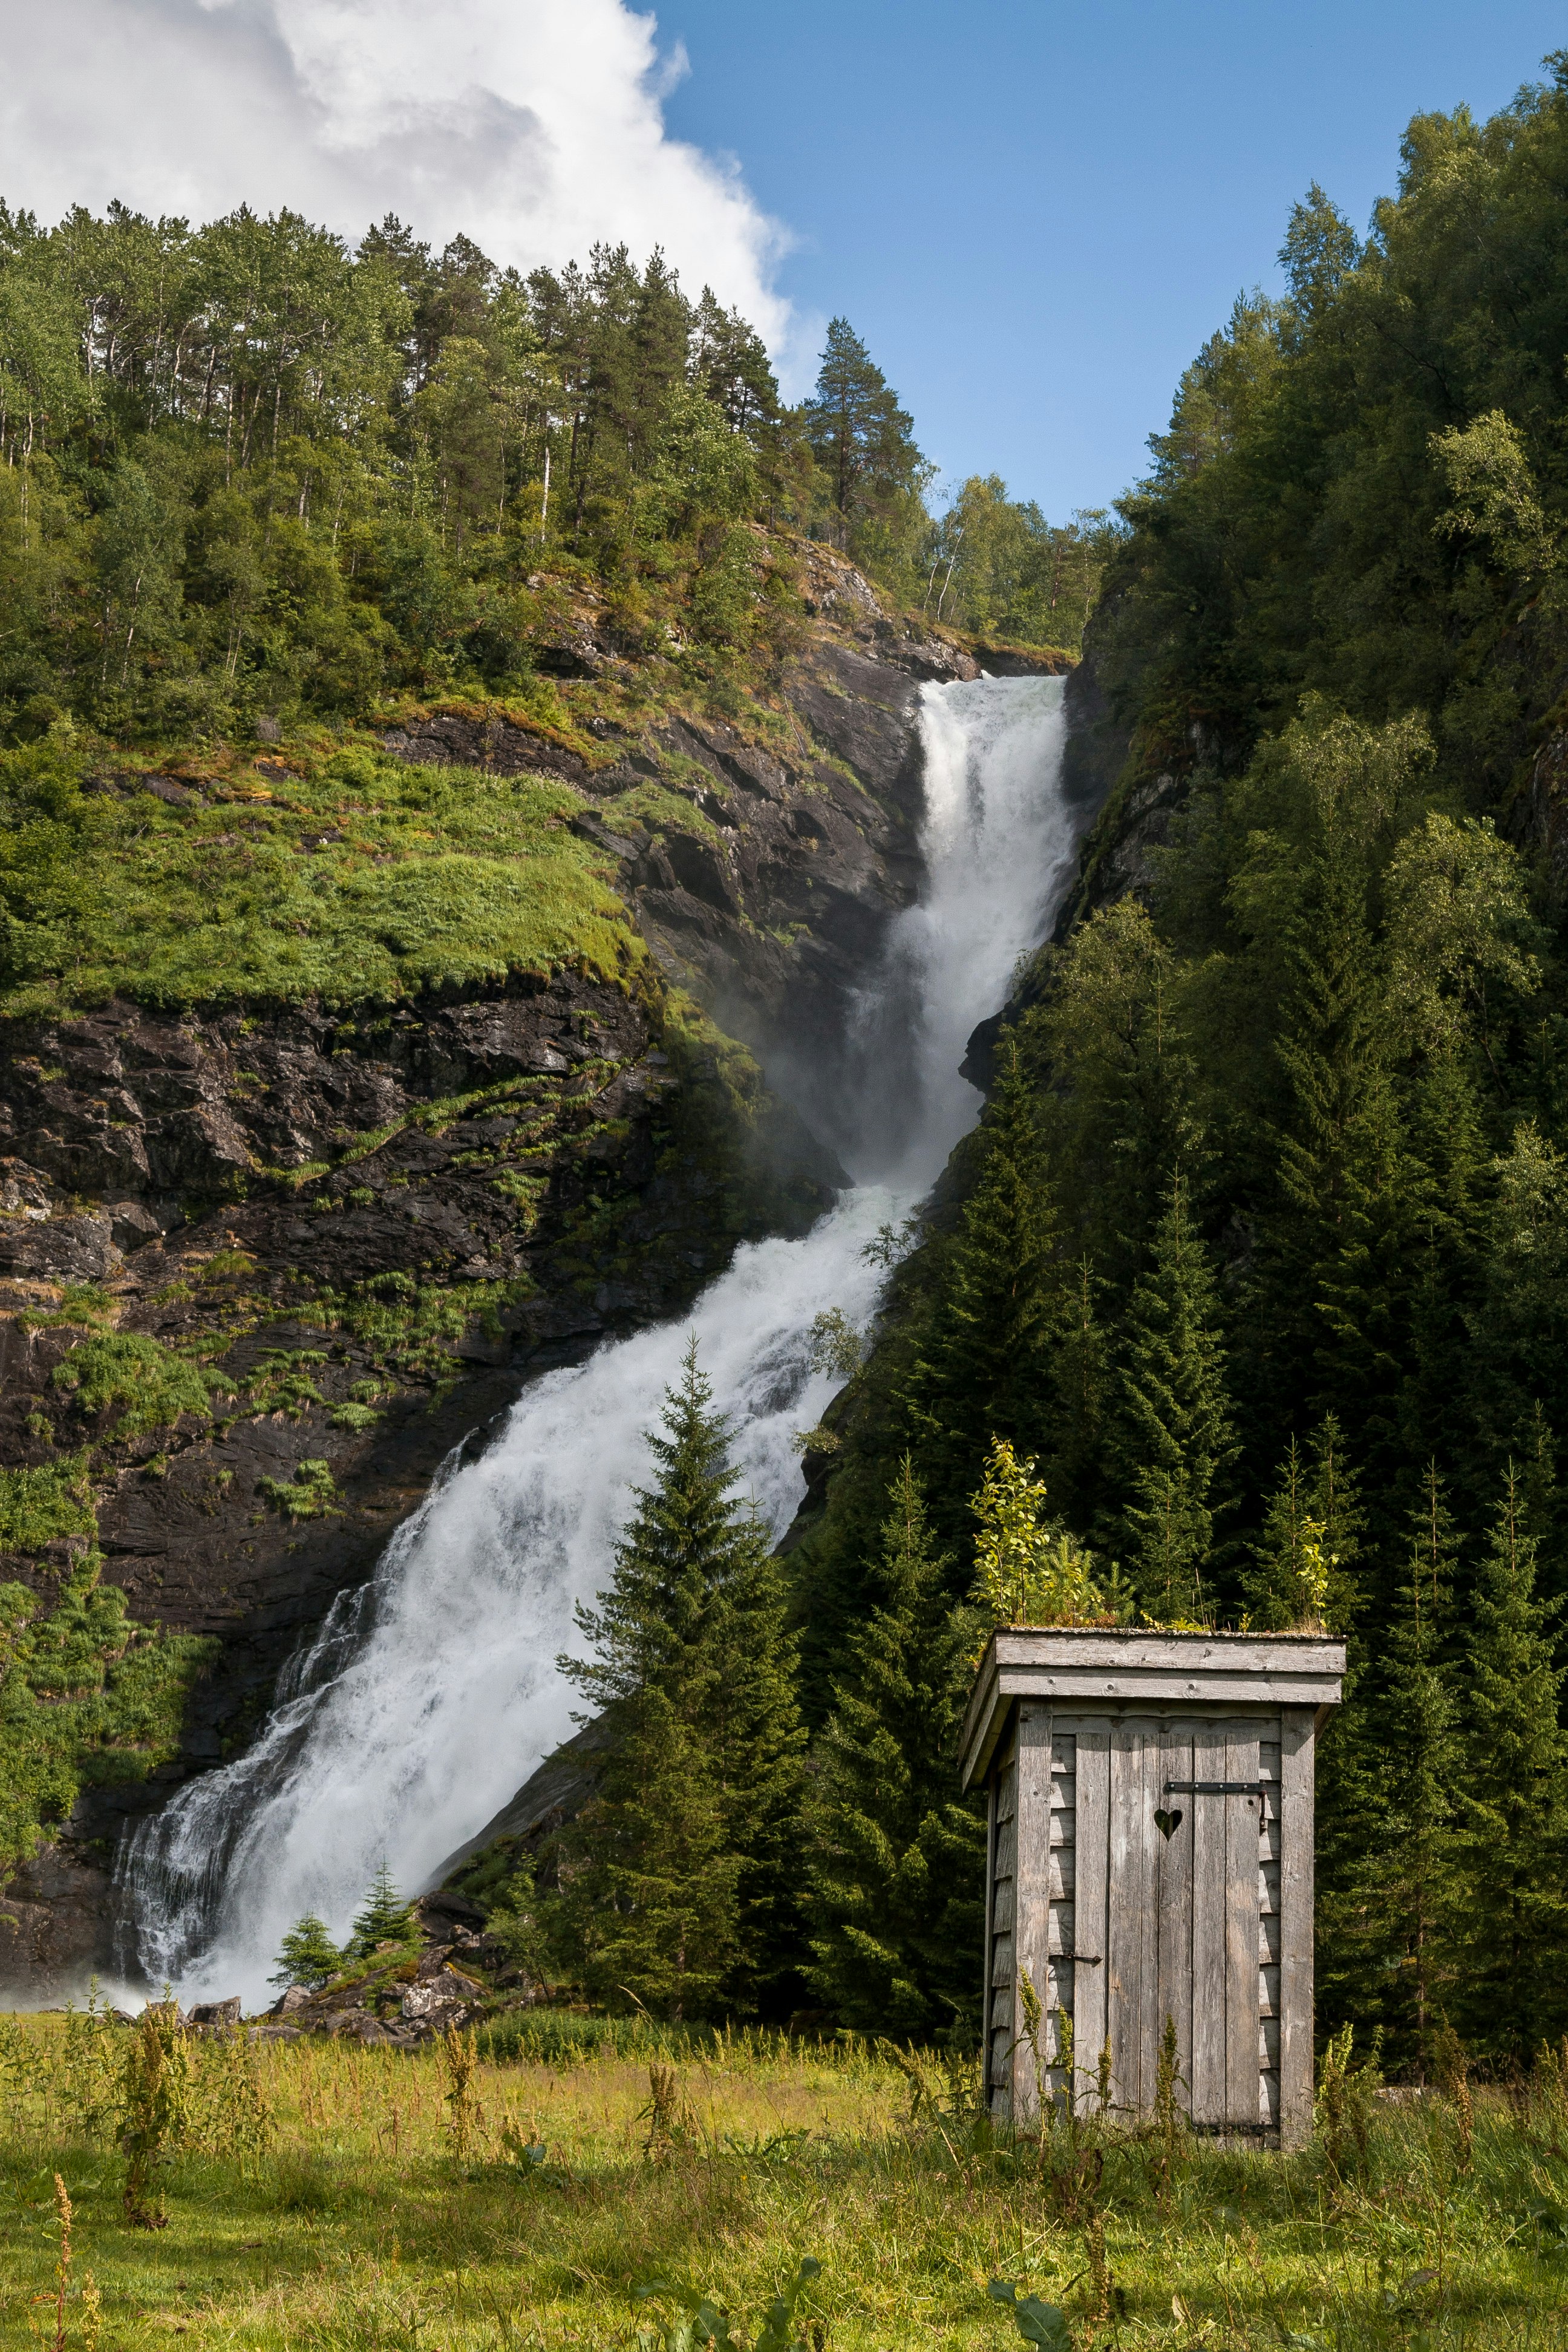 An outhouse next to a waterfall